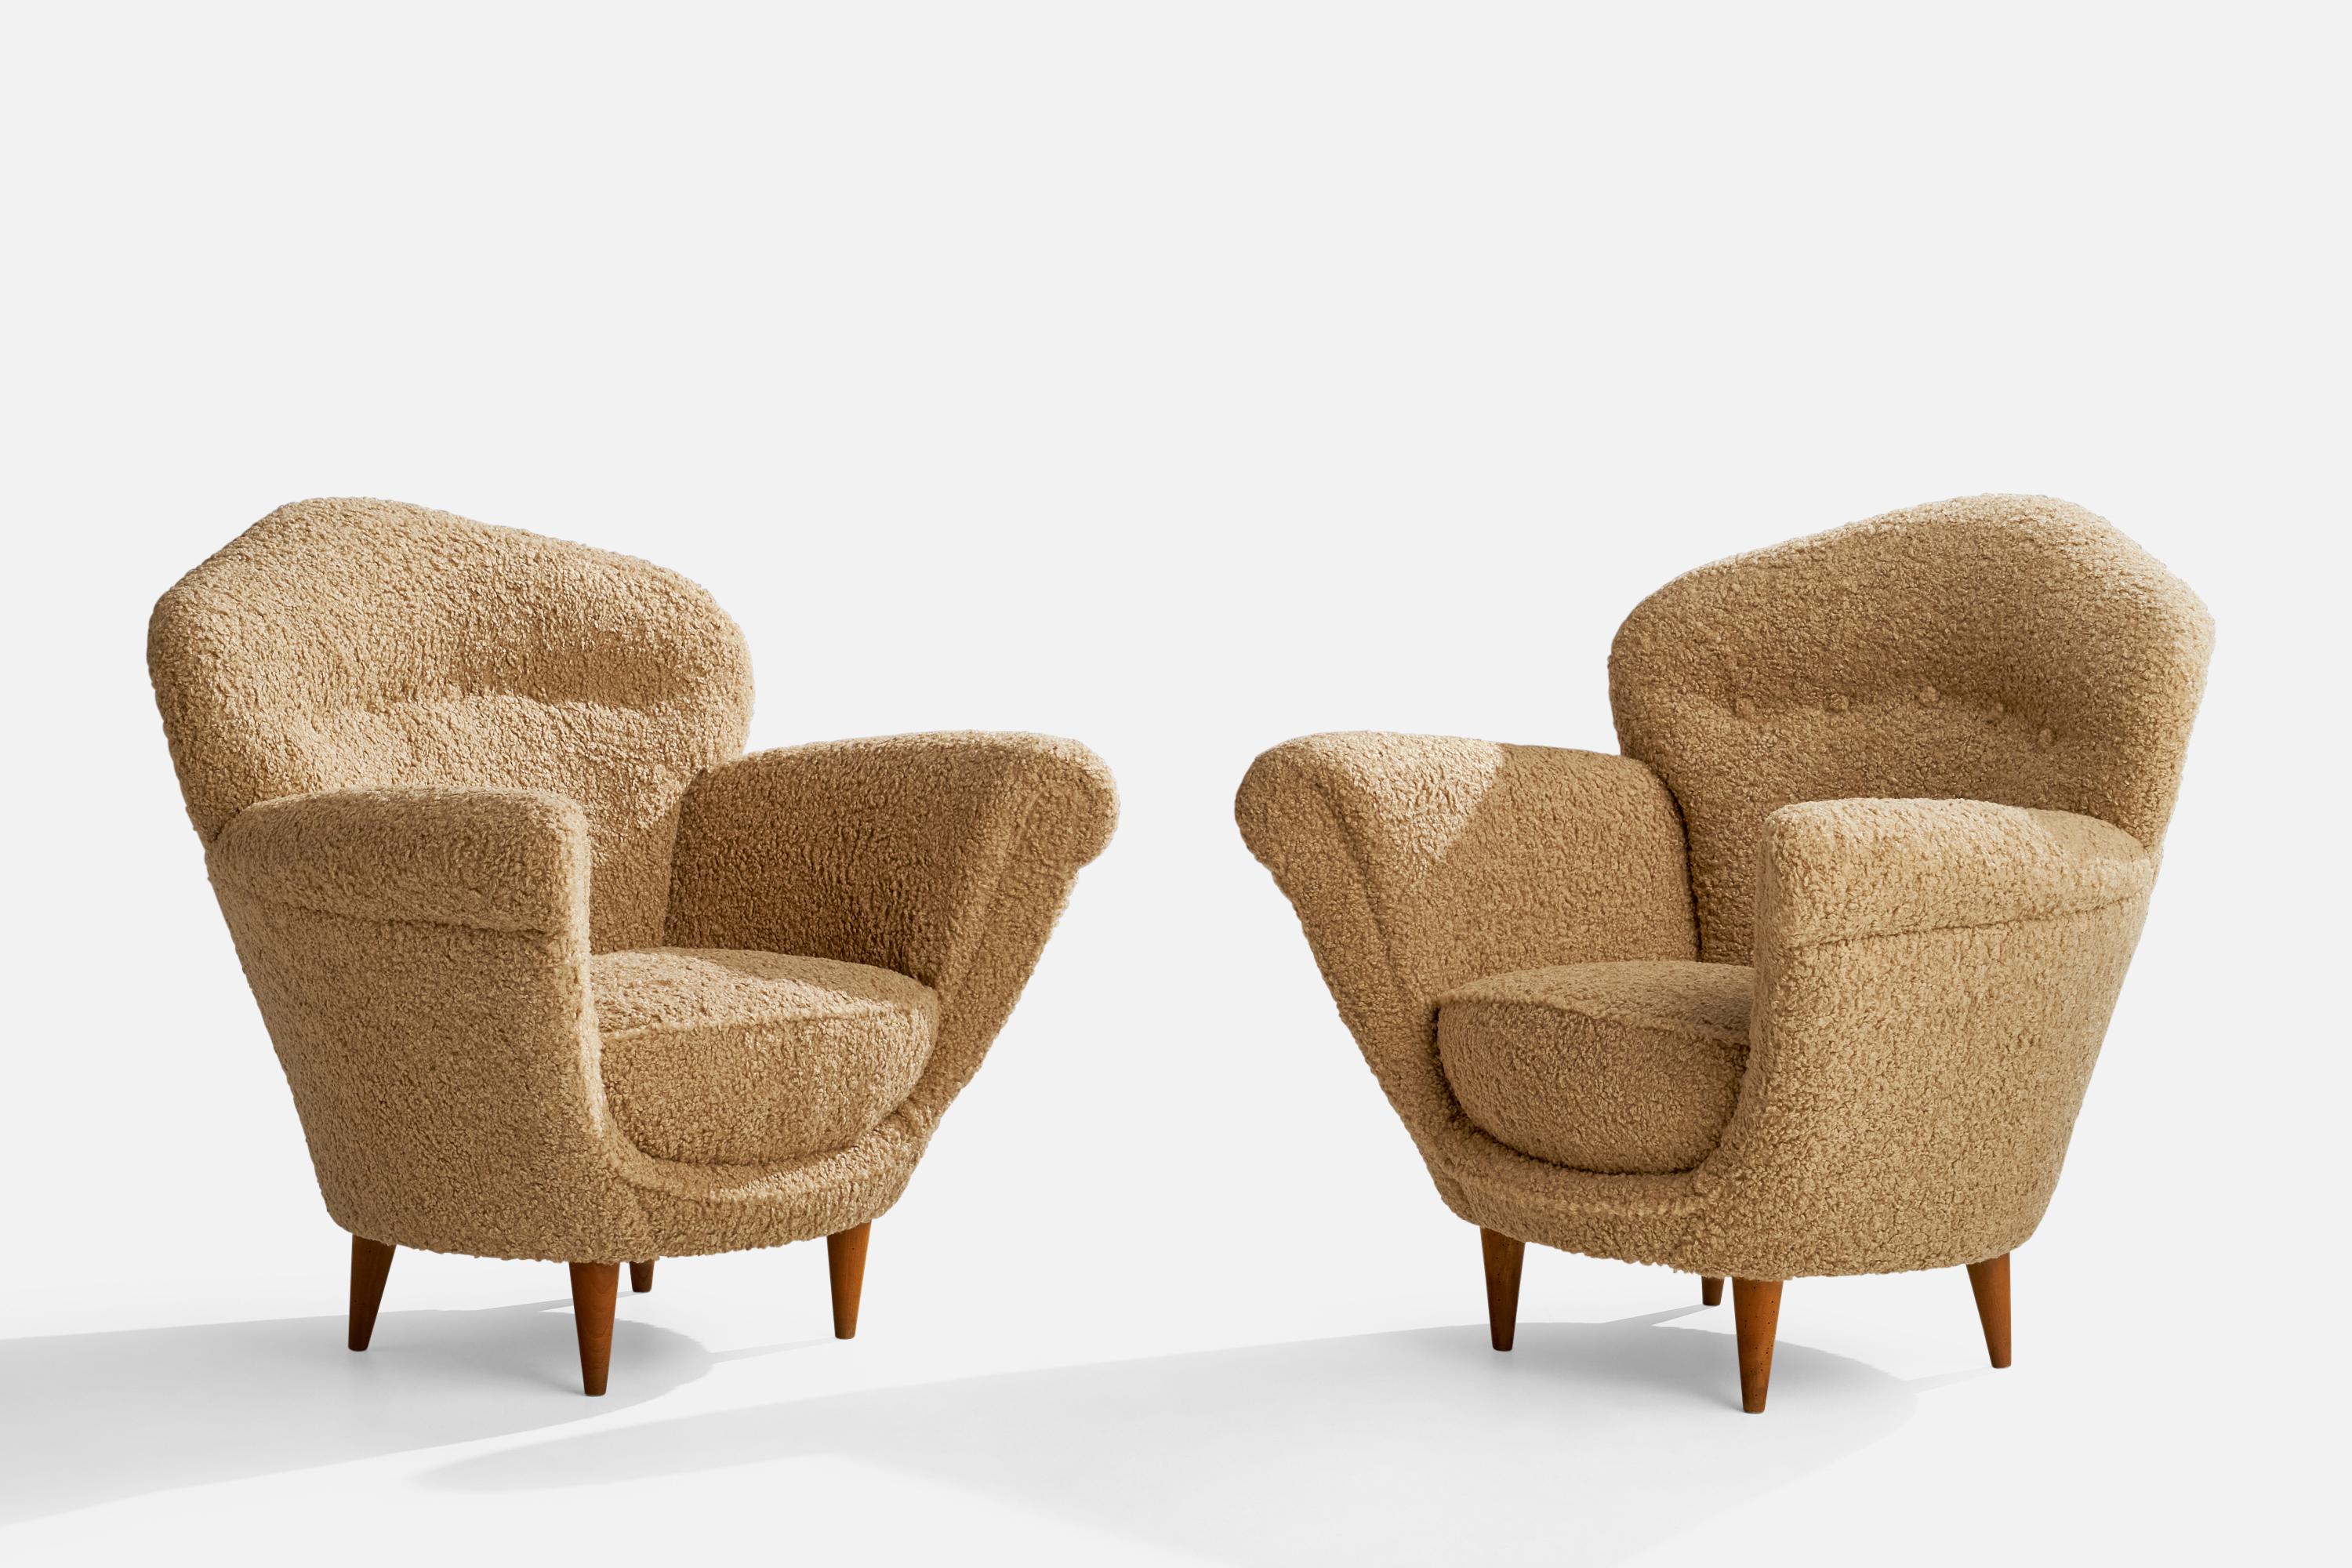 A pair of wood and beige bouclé fabric lounge chairs designed and produced in Italy, 1940s.

Seat height 15.5”